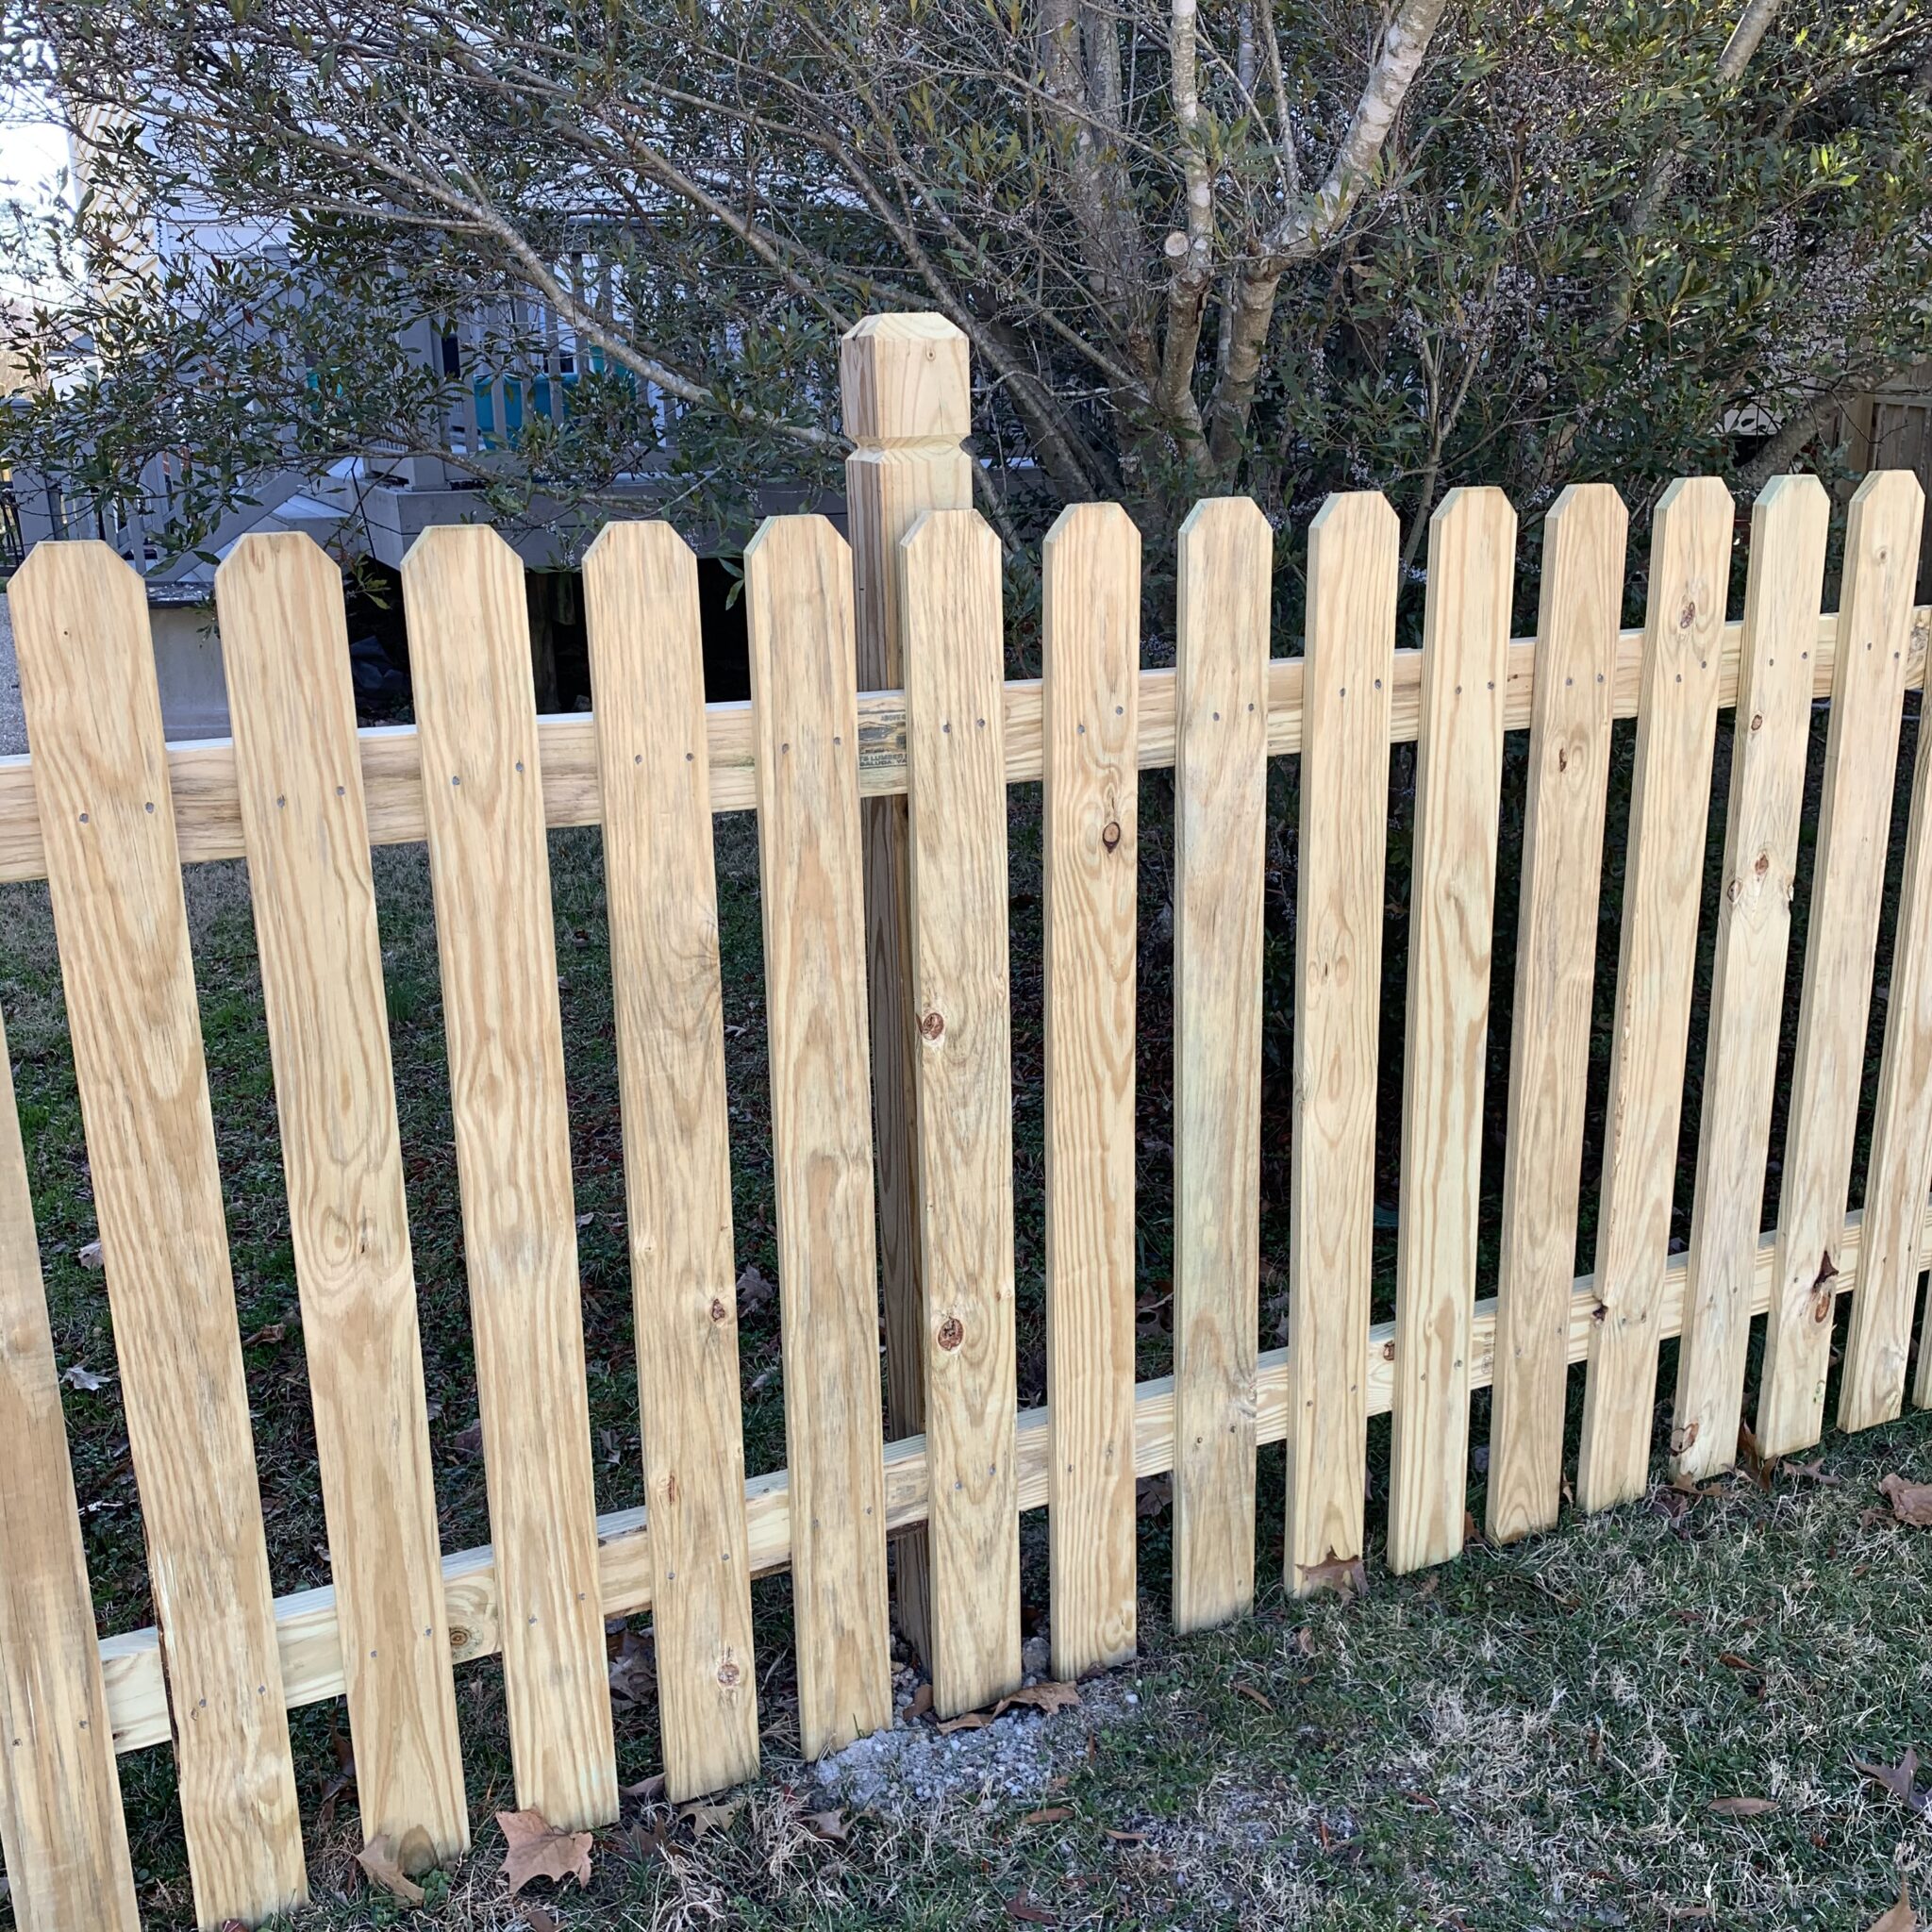 Wood picket fencing with beveled and notched posts.